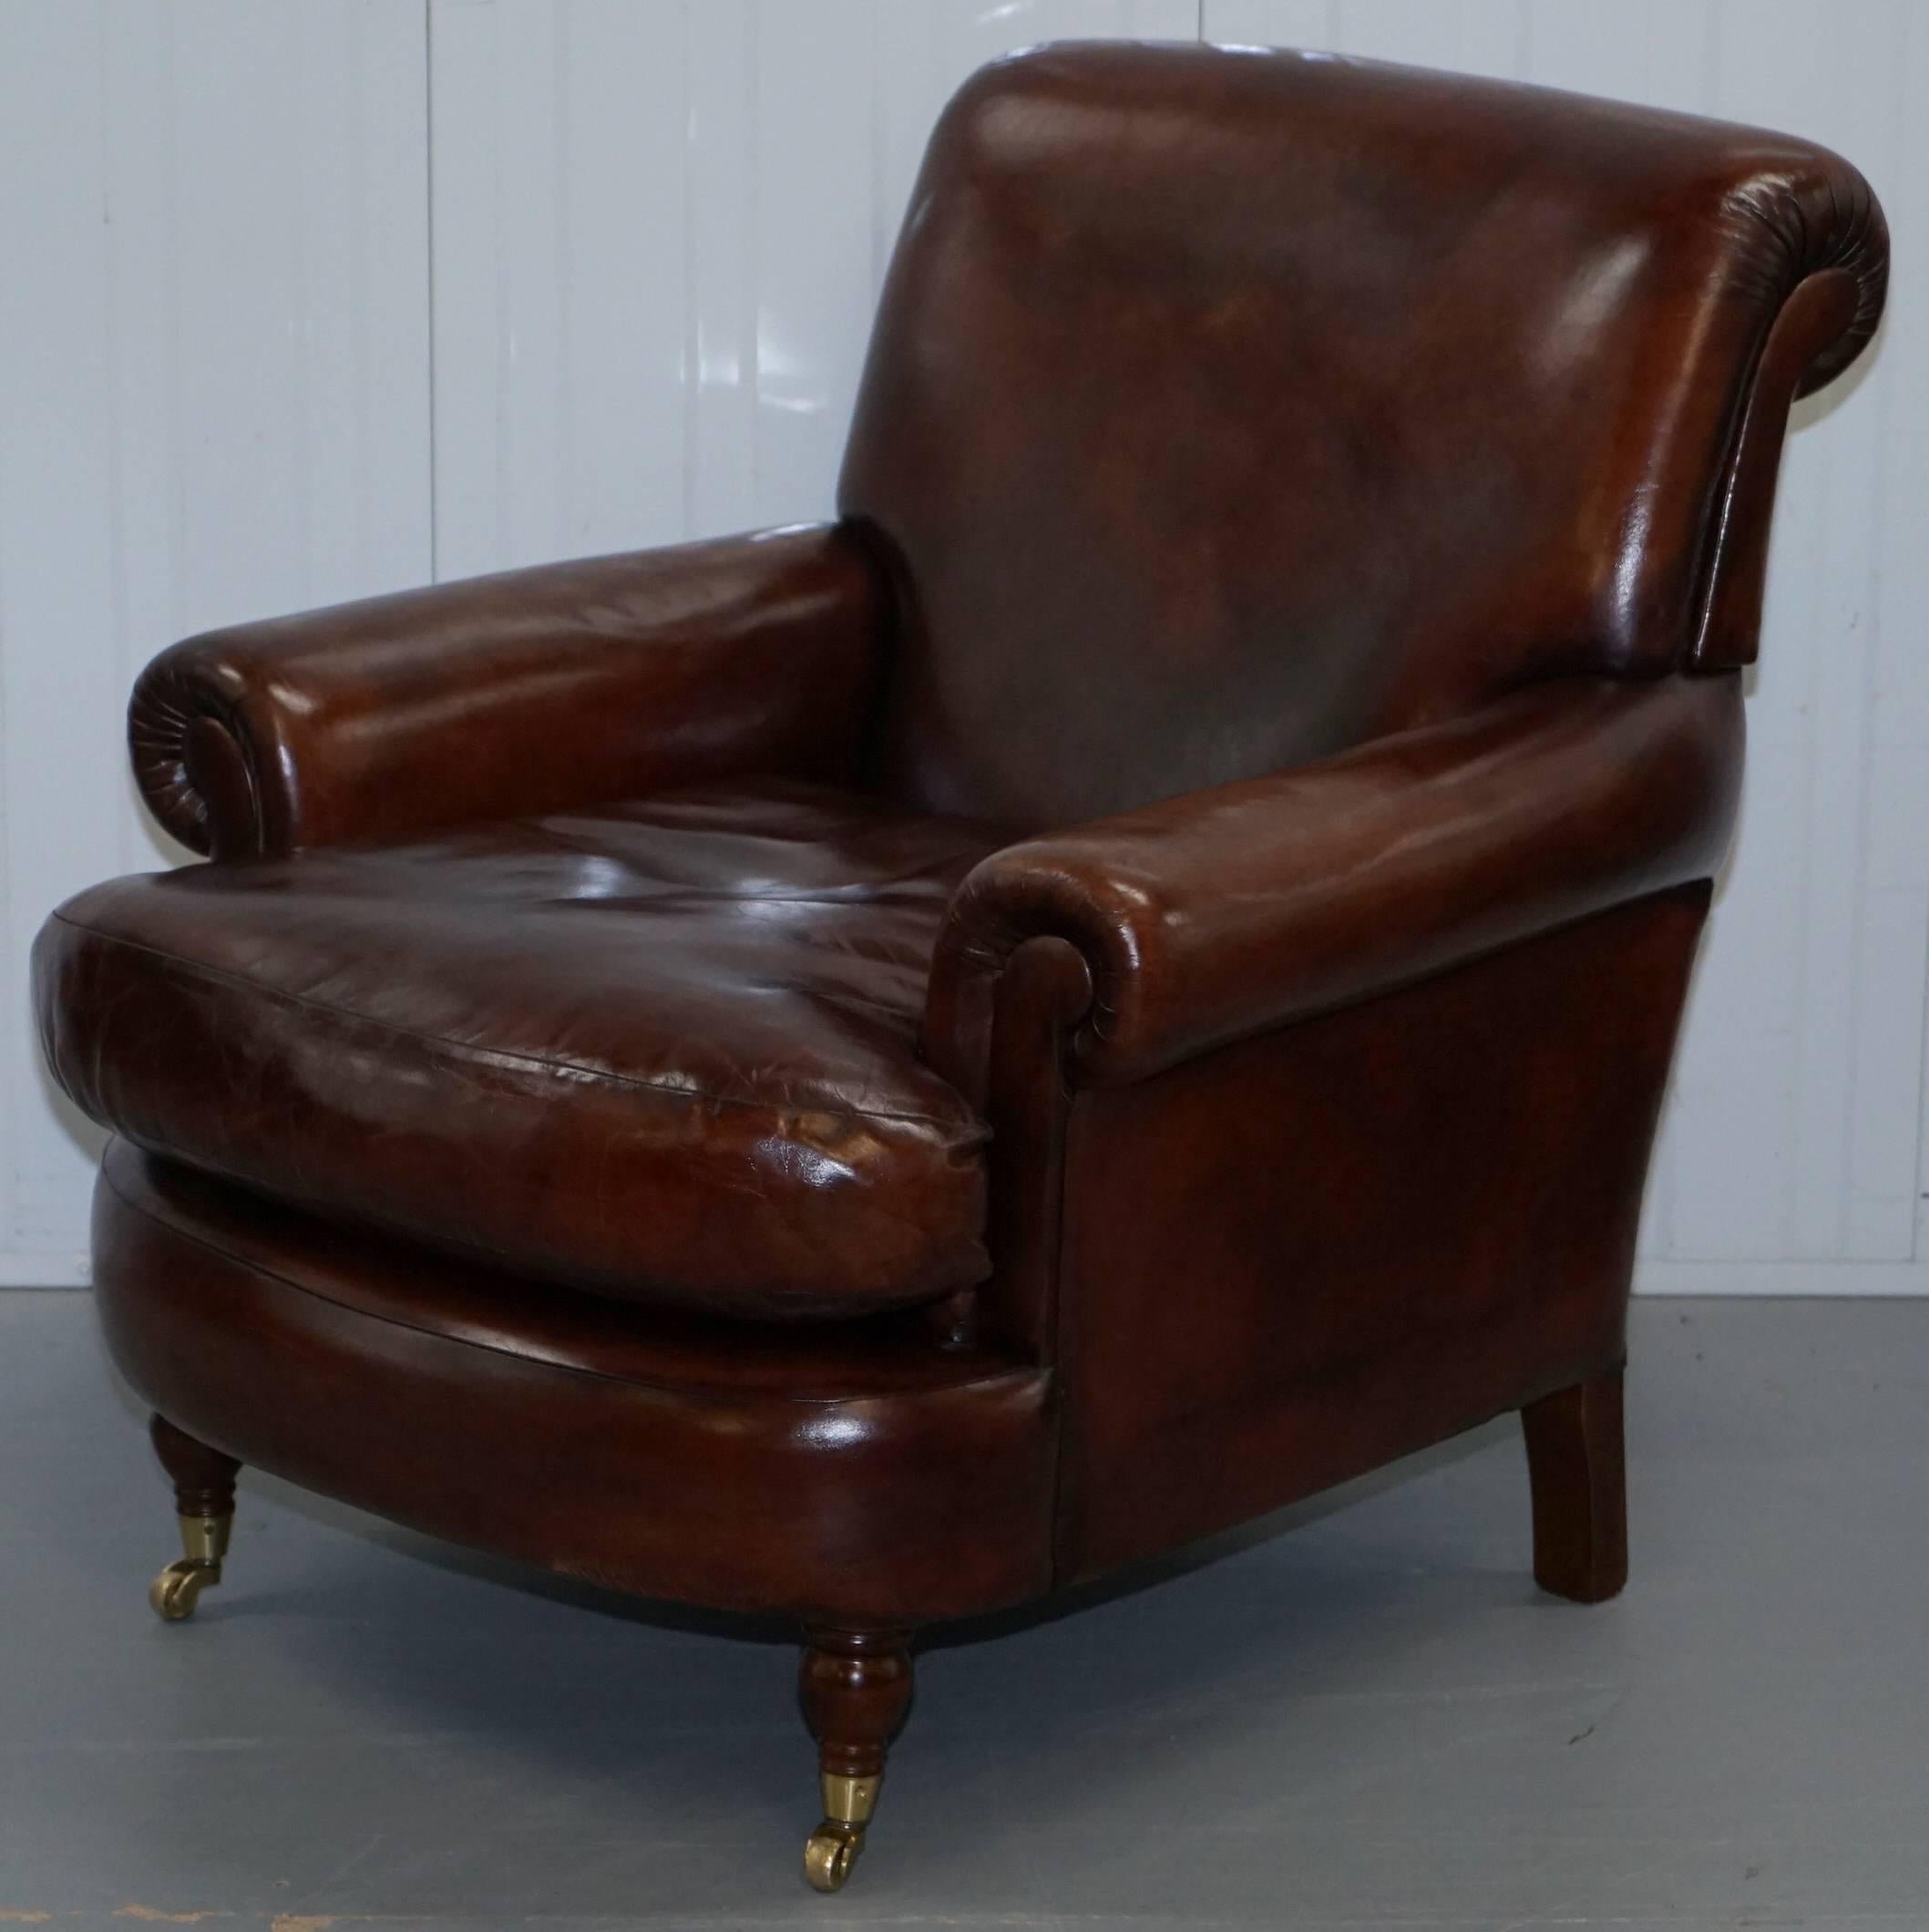 We are delighted to offer for sale this lovely fully restored aged brown vintage leather club armchair with solid beech wood stained legs and brass castors

This chair has been fully restored to include having the old colour stripped out, its then